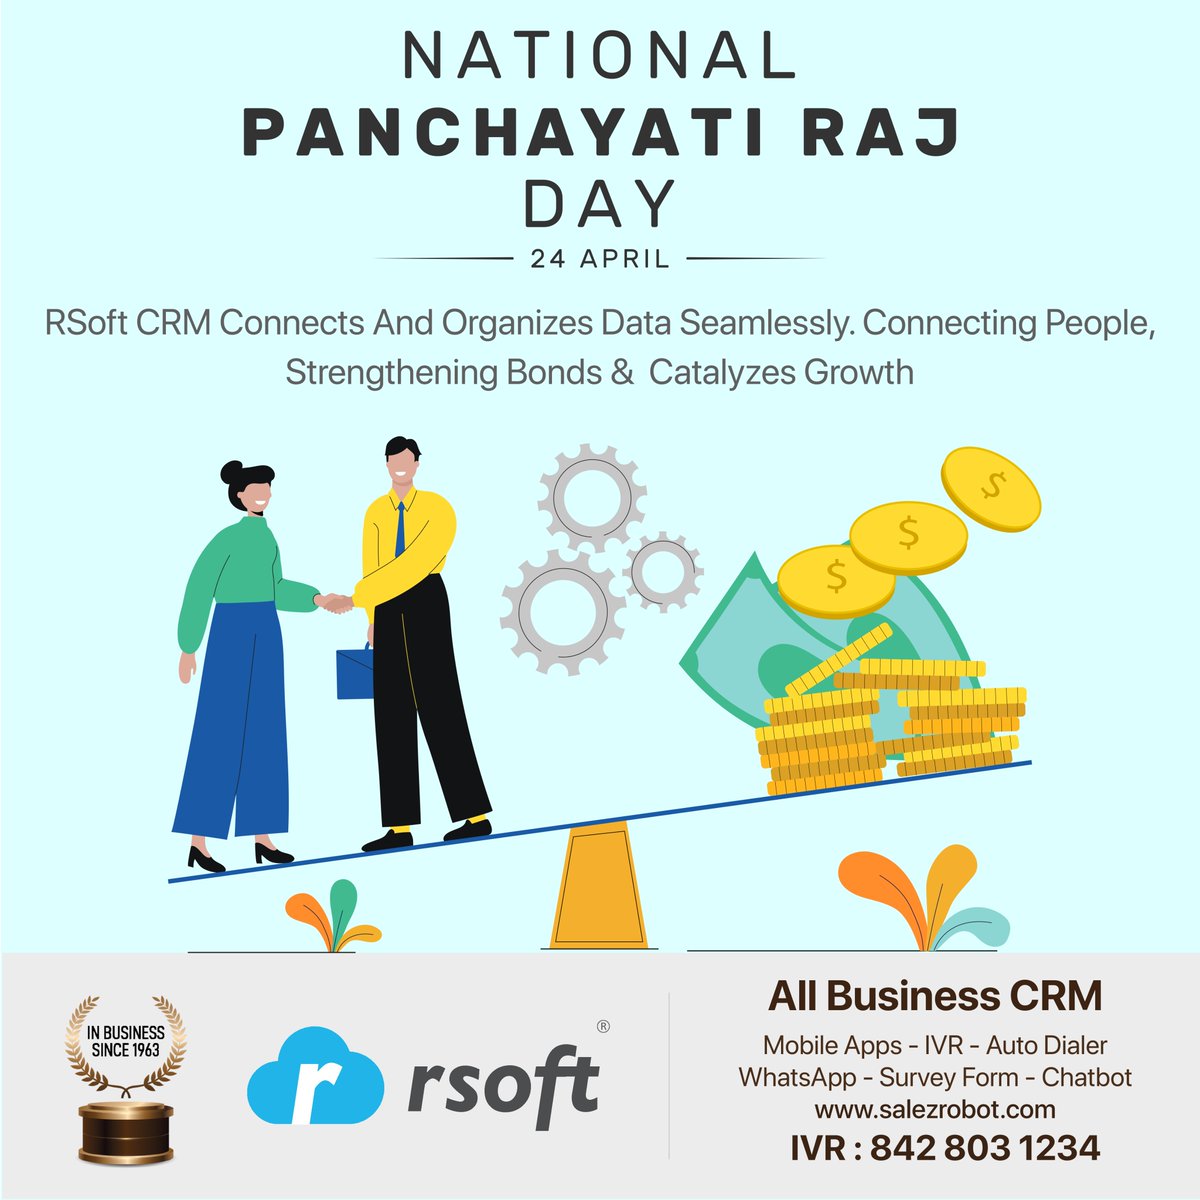 🌟 National Panchayati Raj Day
24 April

RSoft CRM Connects And Organizes Data Seamlessly. Connecting People, Strengthening Bonds & Catalyzes Growth 🌱

#NationalPanchayatiRajDay #24April #RSoftCRM #ConnectingPeople #StrengtheningBonds #CatalyzingGrowth #CommunityStrength